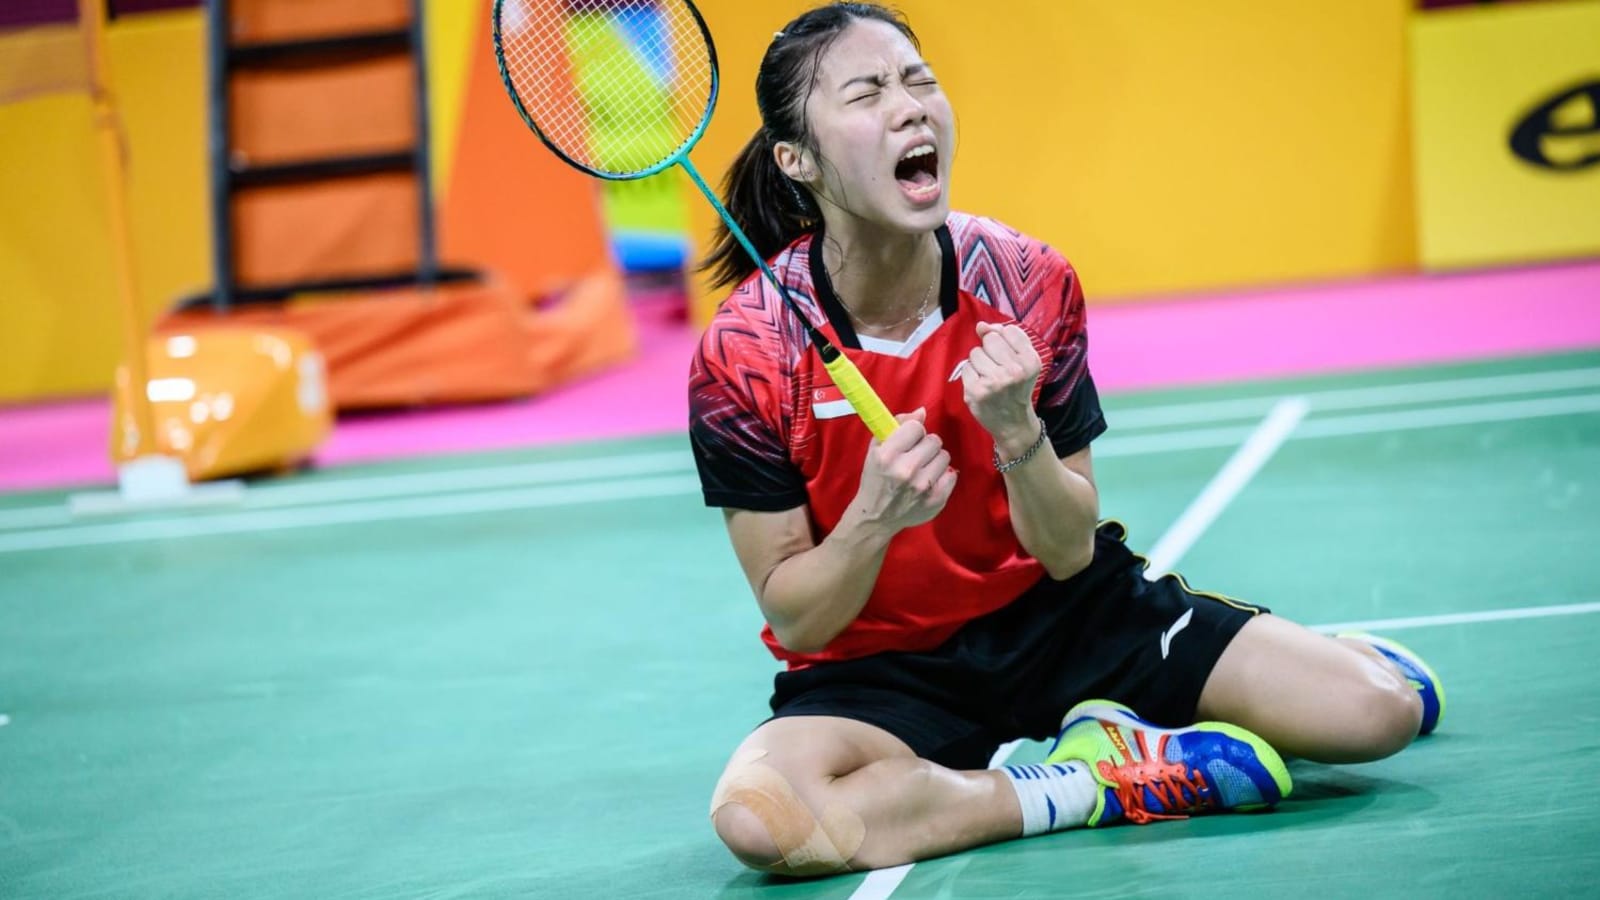 Badminton: Yeo Jia Min clinches singles bronze for Singapore at Commonwealth Games thumbnail